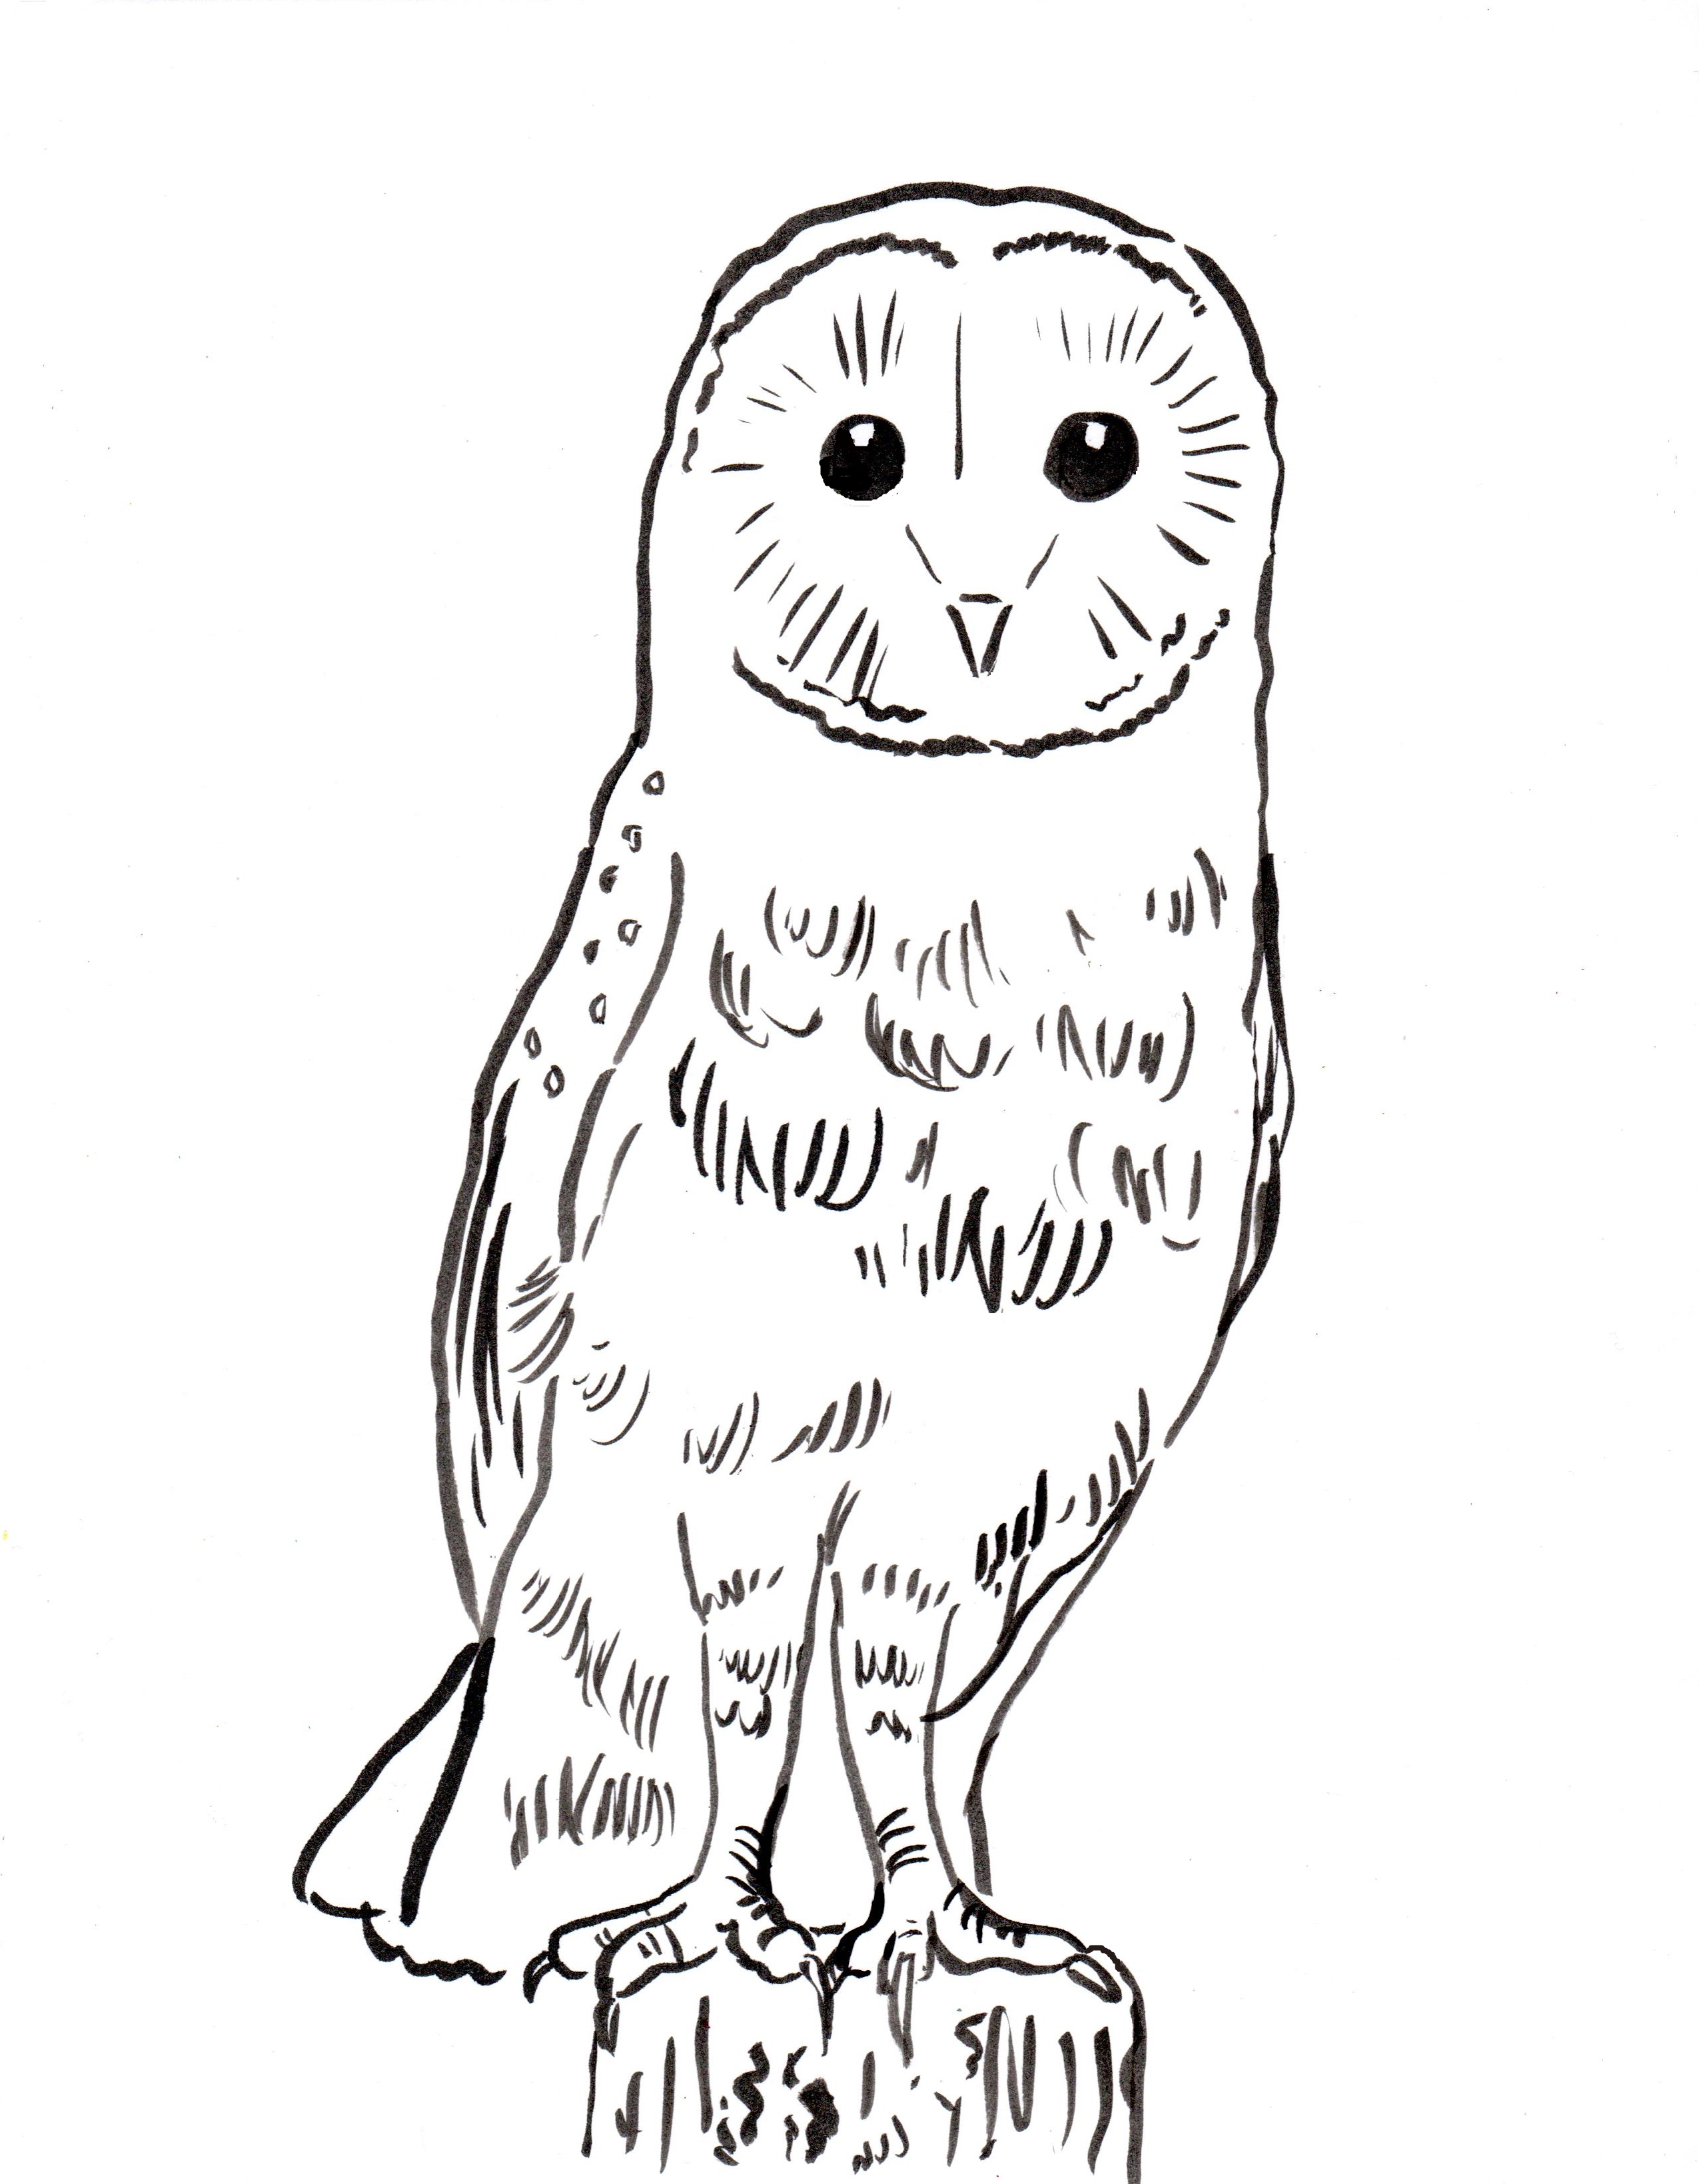 Download Barn Owl Coloring Page - Art Starts